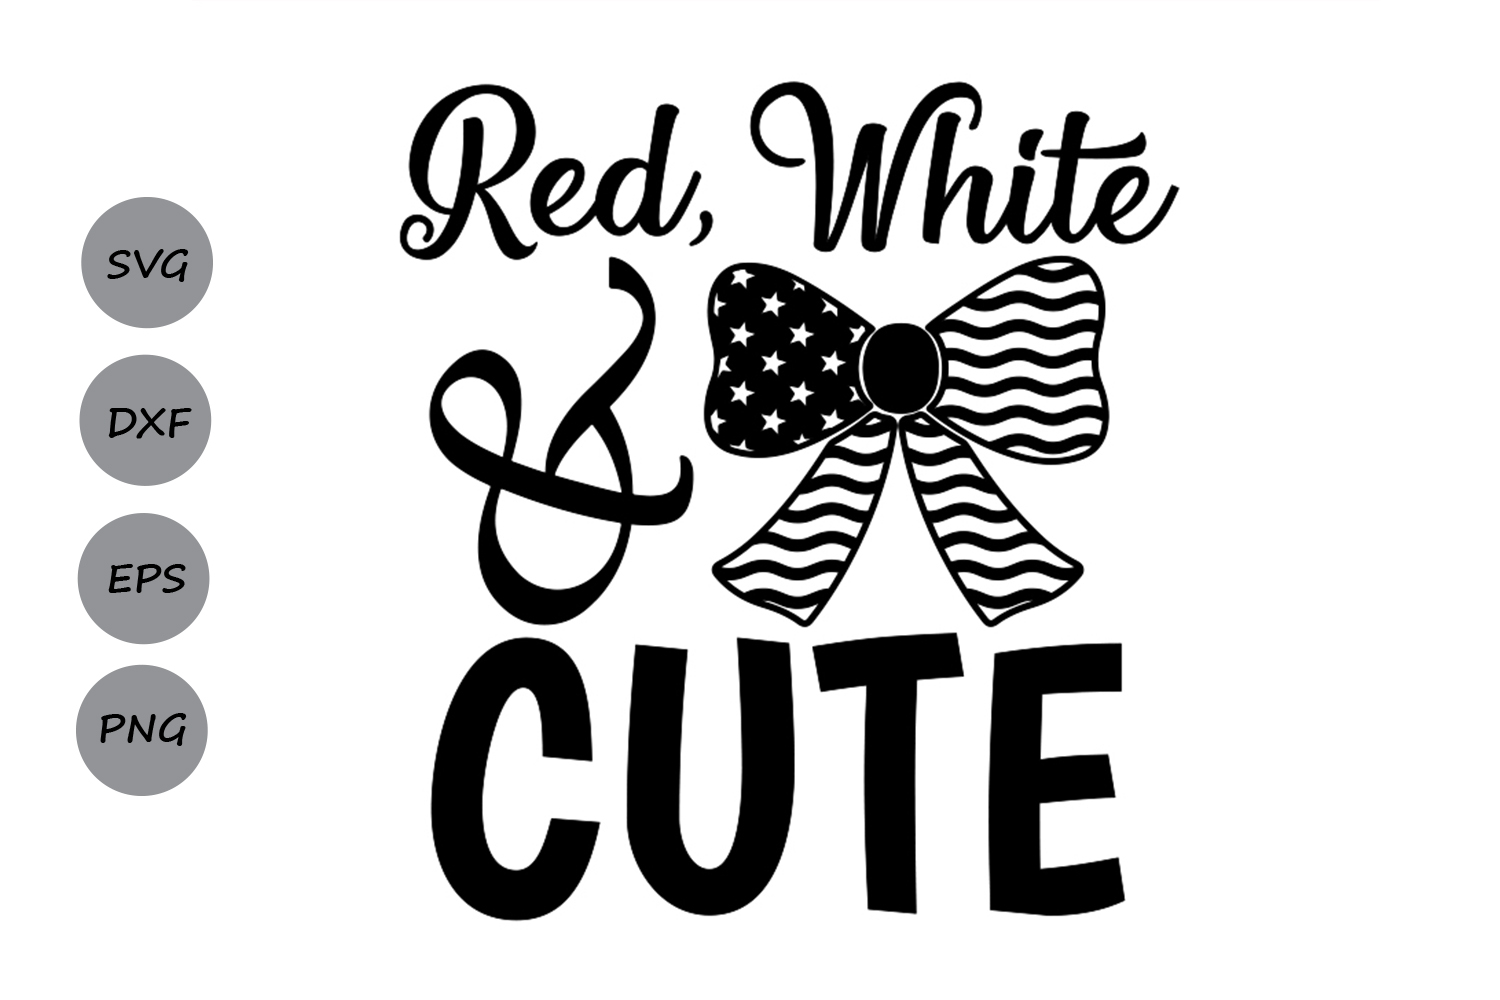 Red White and Cute svg, 4th of July SVG, Patriotic SVG, July 4th Svg